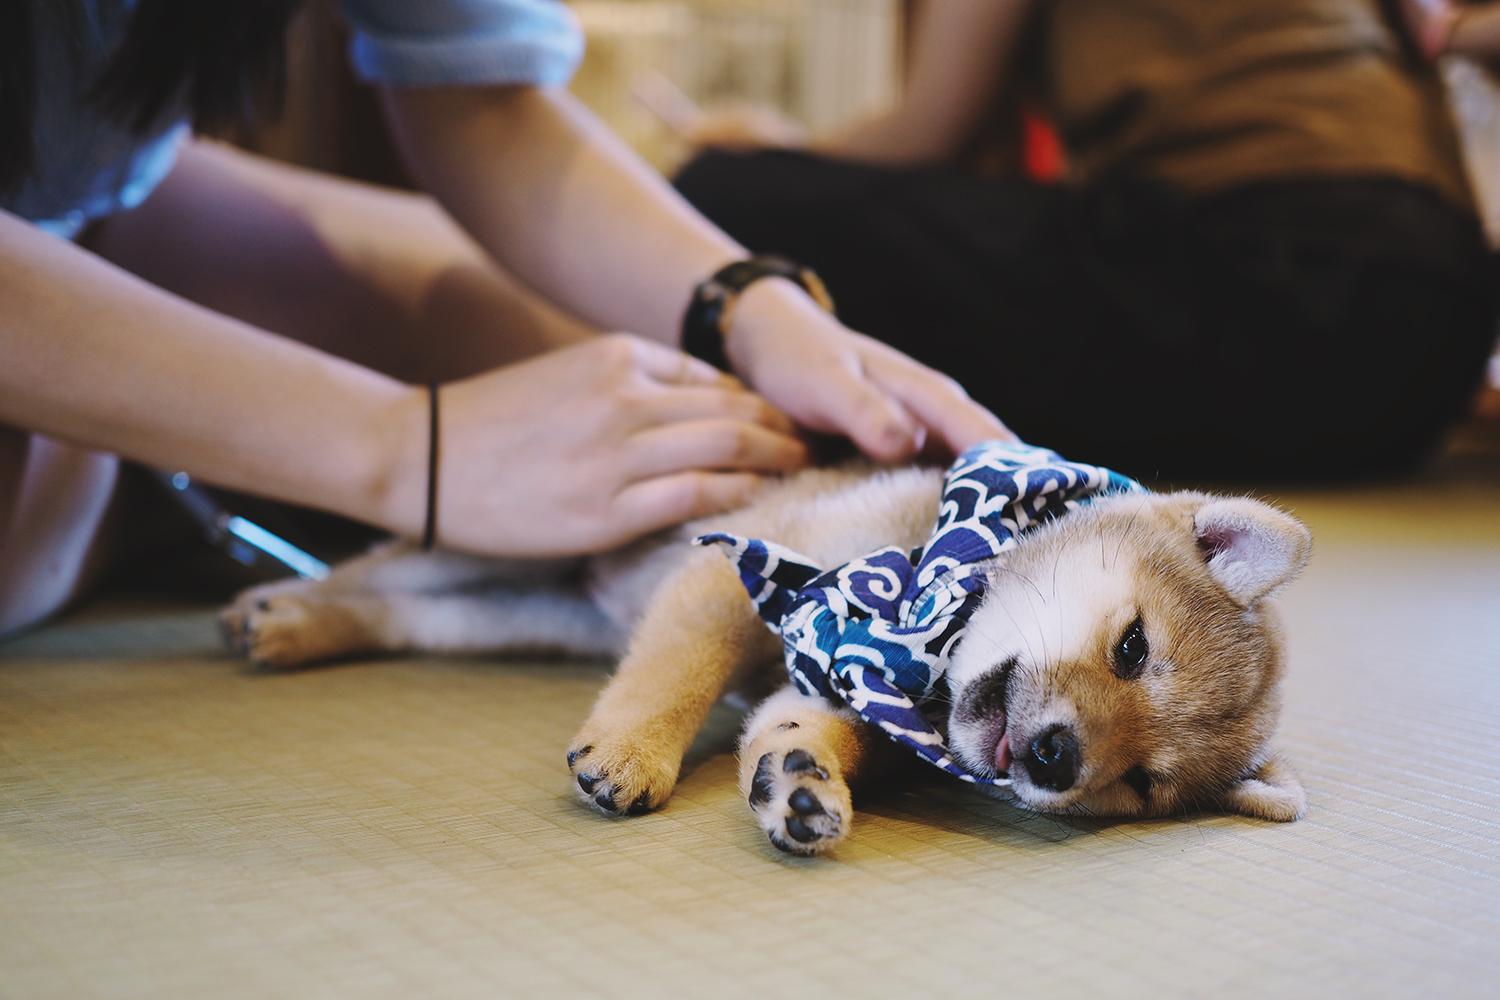 Pedia] Animal Cafes in Tokyo: Cats, Dogs and…Snakes? | Japanese kawaii idol  music culture news | Tokyo Girls Update